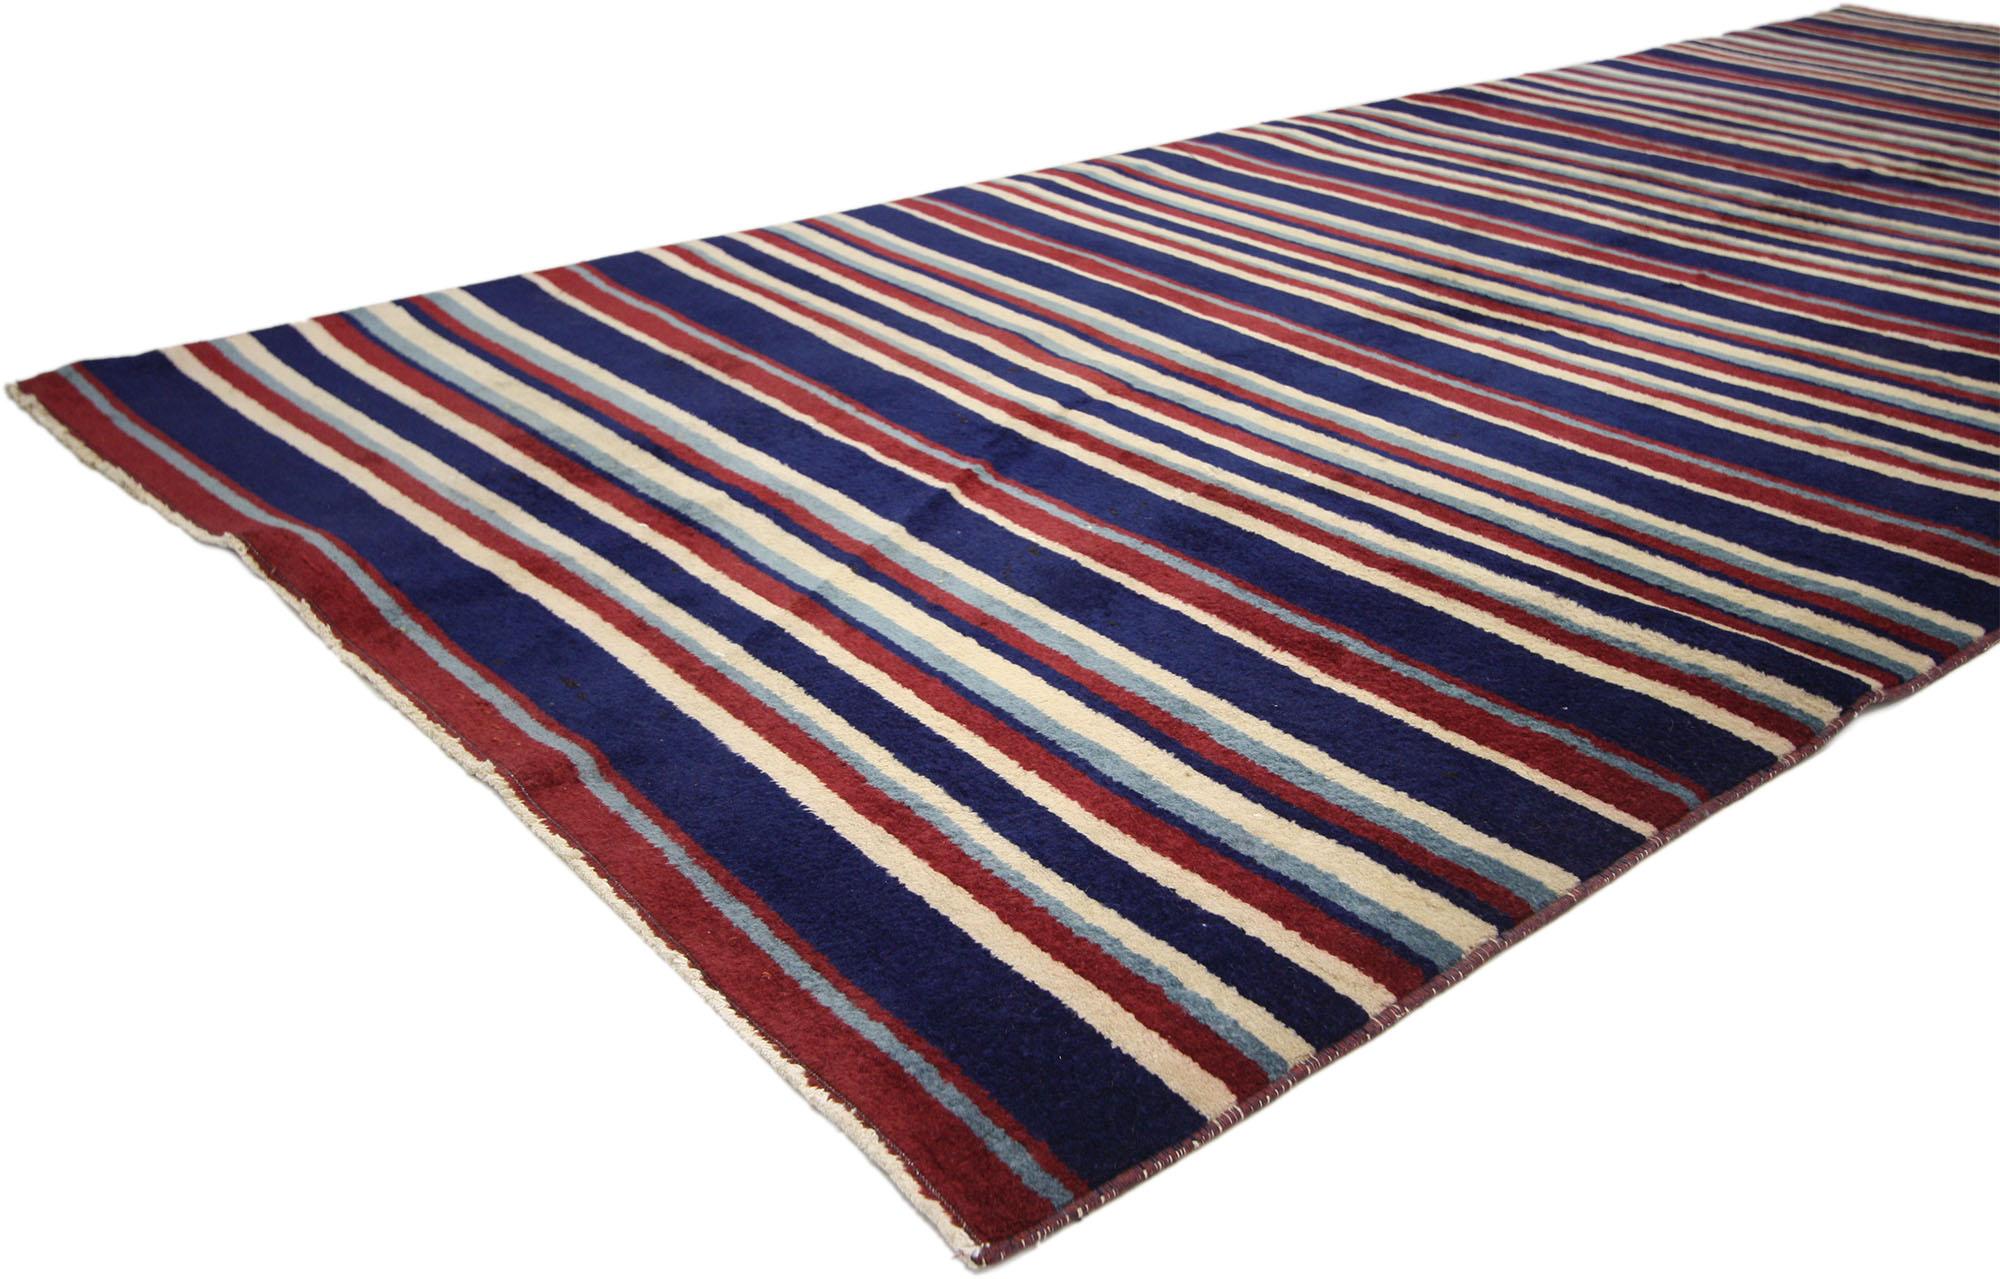 51346, vintage Turkish Sivas Gallery rug with stripes and nautical style, wide hallway runner. With its nautical style and cozy coastal vibes, this hand knotted wool vintage Turkish Sivas rug features a series of Bayadere stripes composed of